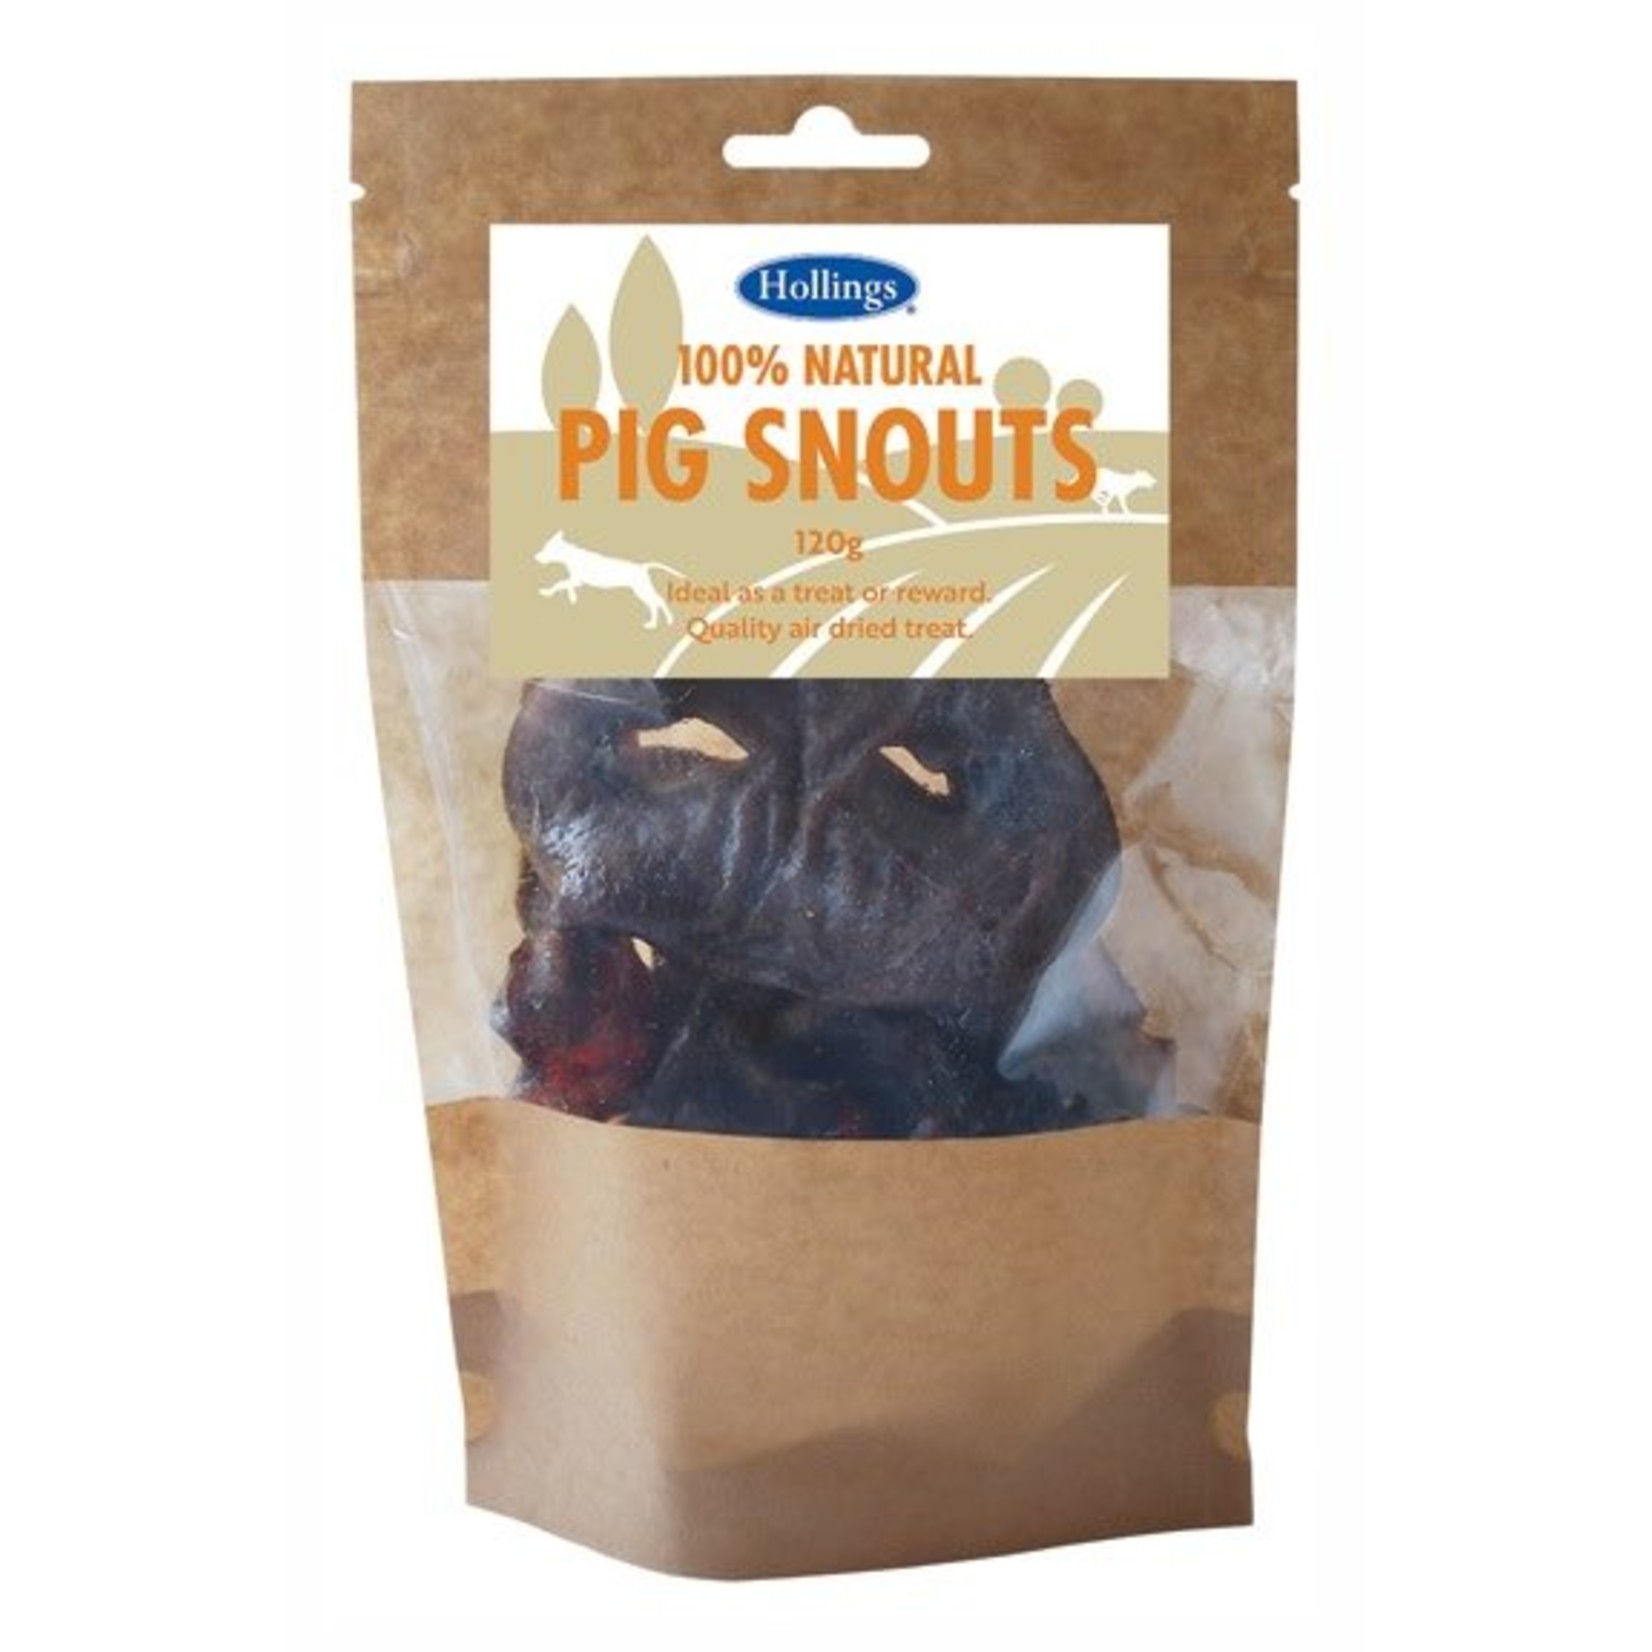 Hollings 100% Natural Pig Snouts Dog Treat, 120g